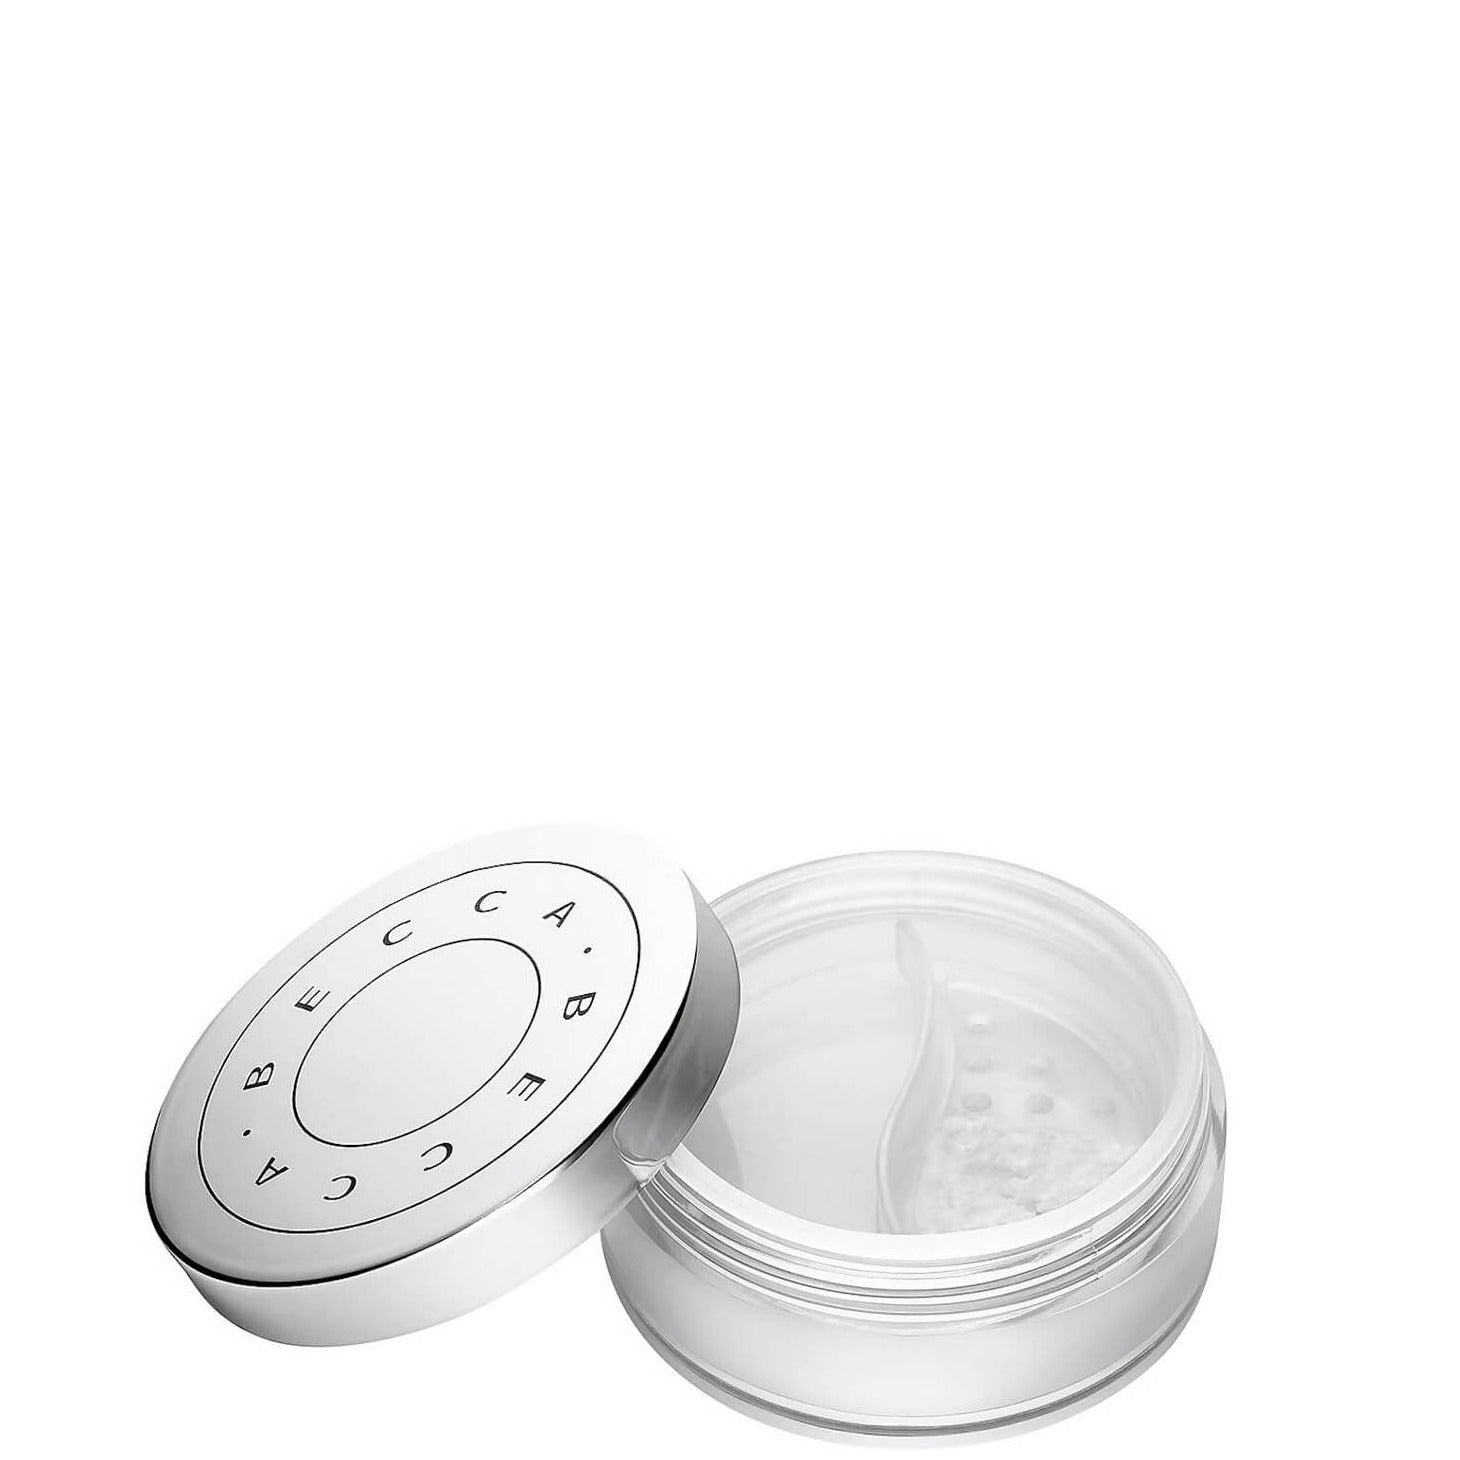 Becca undereye brightening setting powder full size 2.3 grams is a fan favorite to help erase 10 years with light reflecting pigments that draws attention away from noticing dark circles, wrinkles or any under eye flaws. makes the perfect combination with the other two under eye correcting products such as the primer & the peach corrector